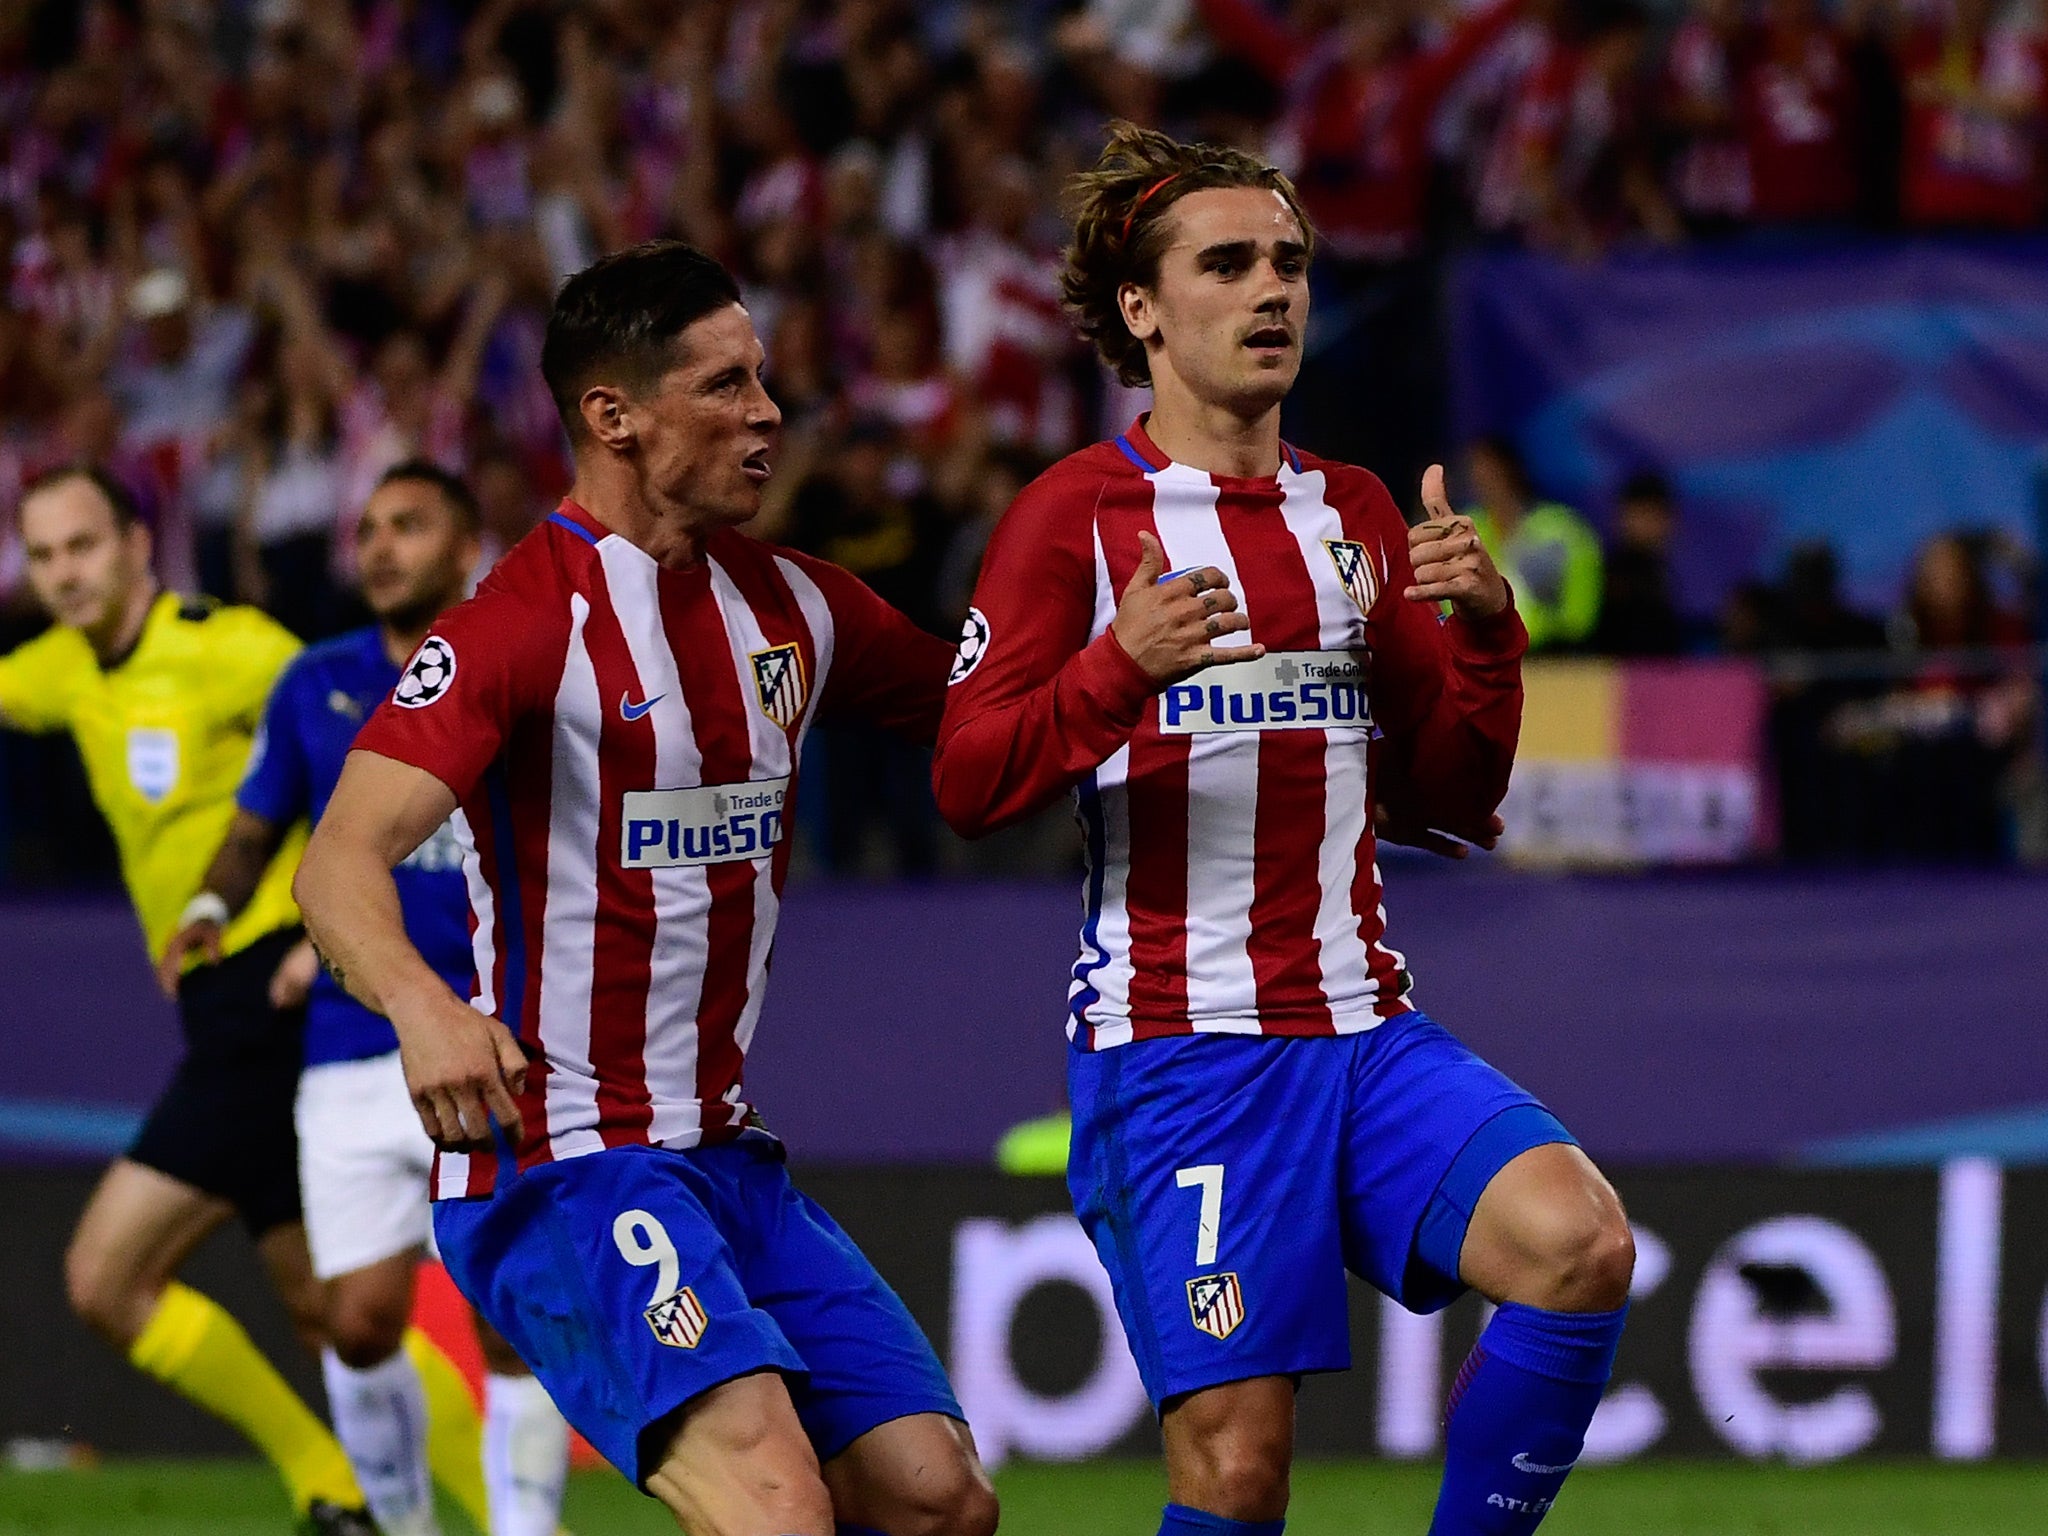 Atletico Madrid went ahead after Antoine Griezmann broke the deadlock in the first-half